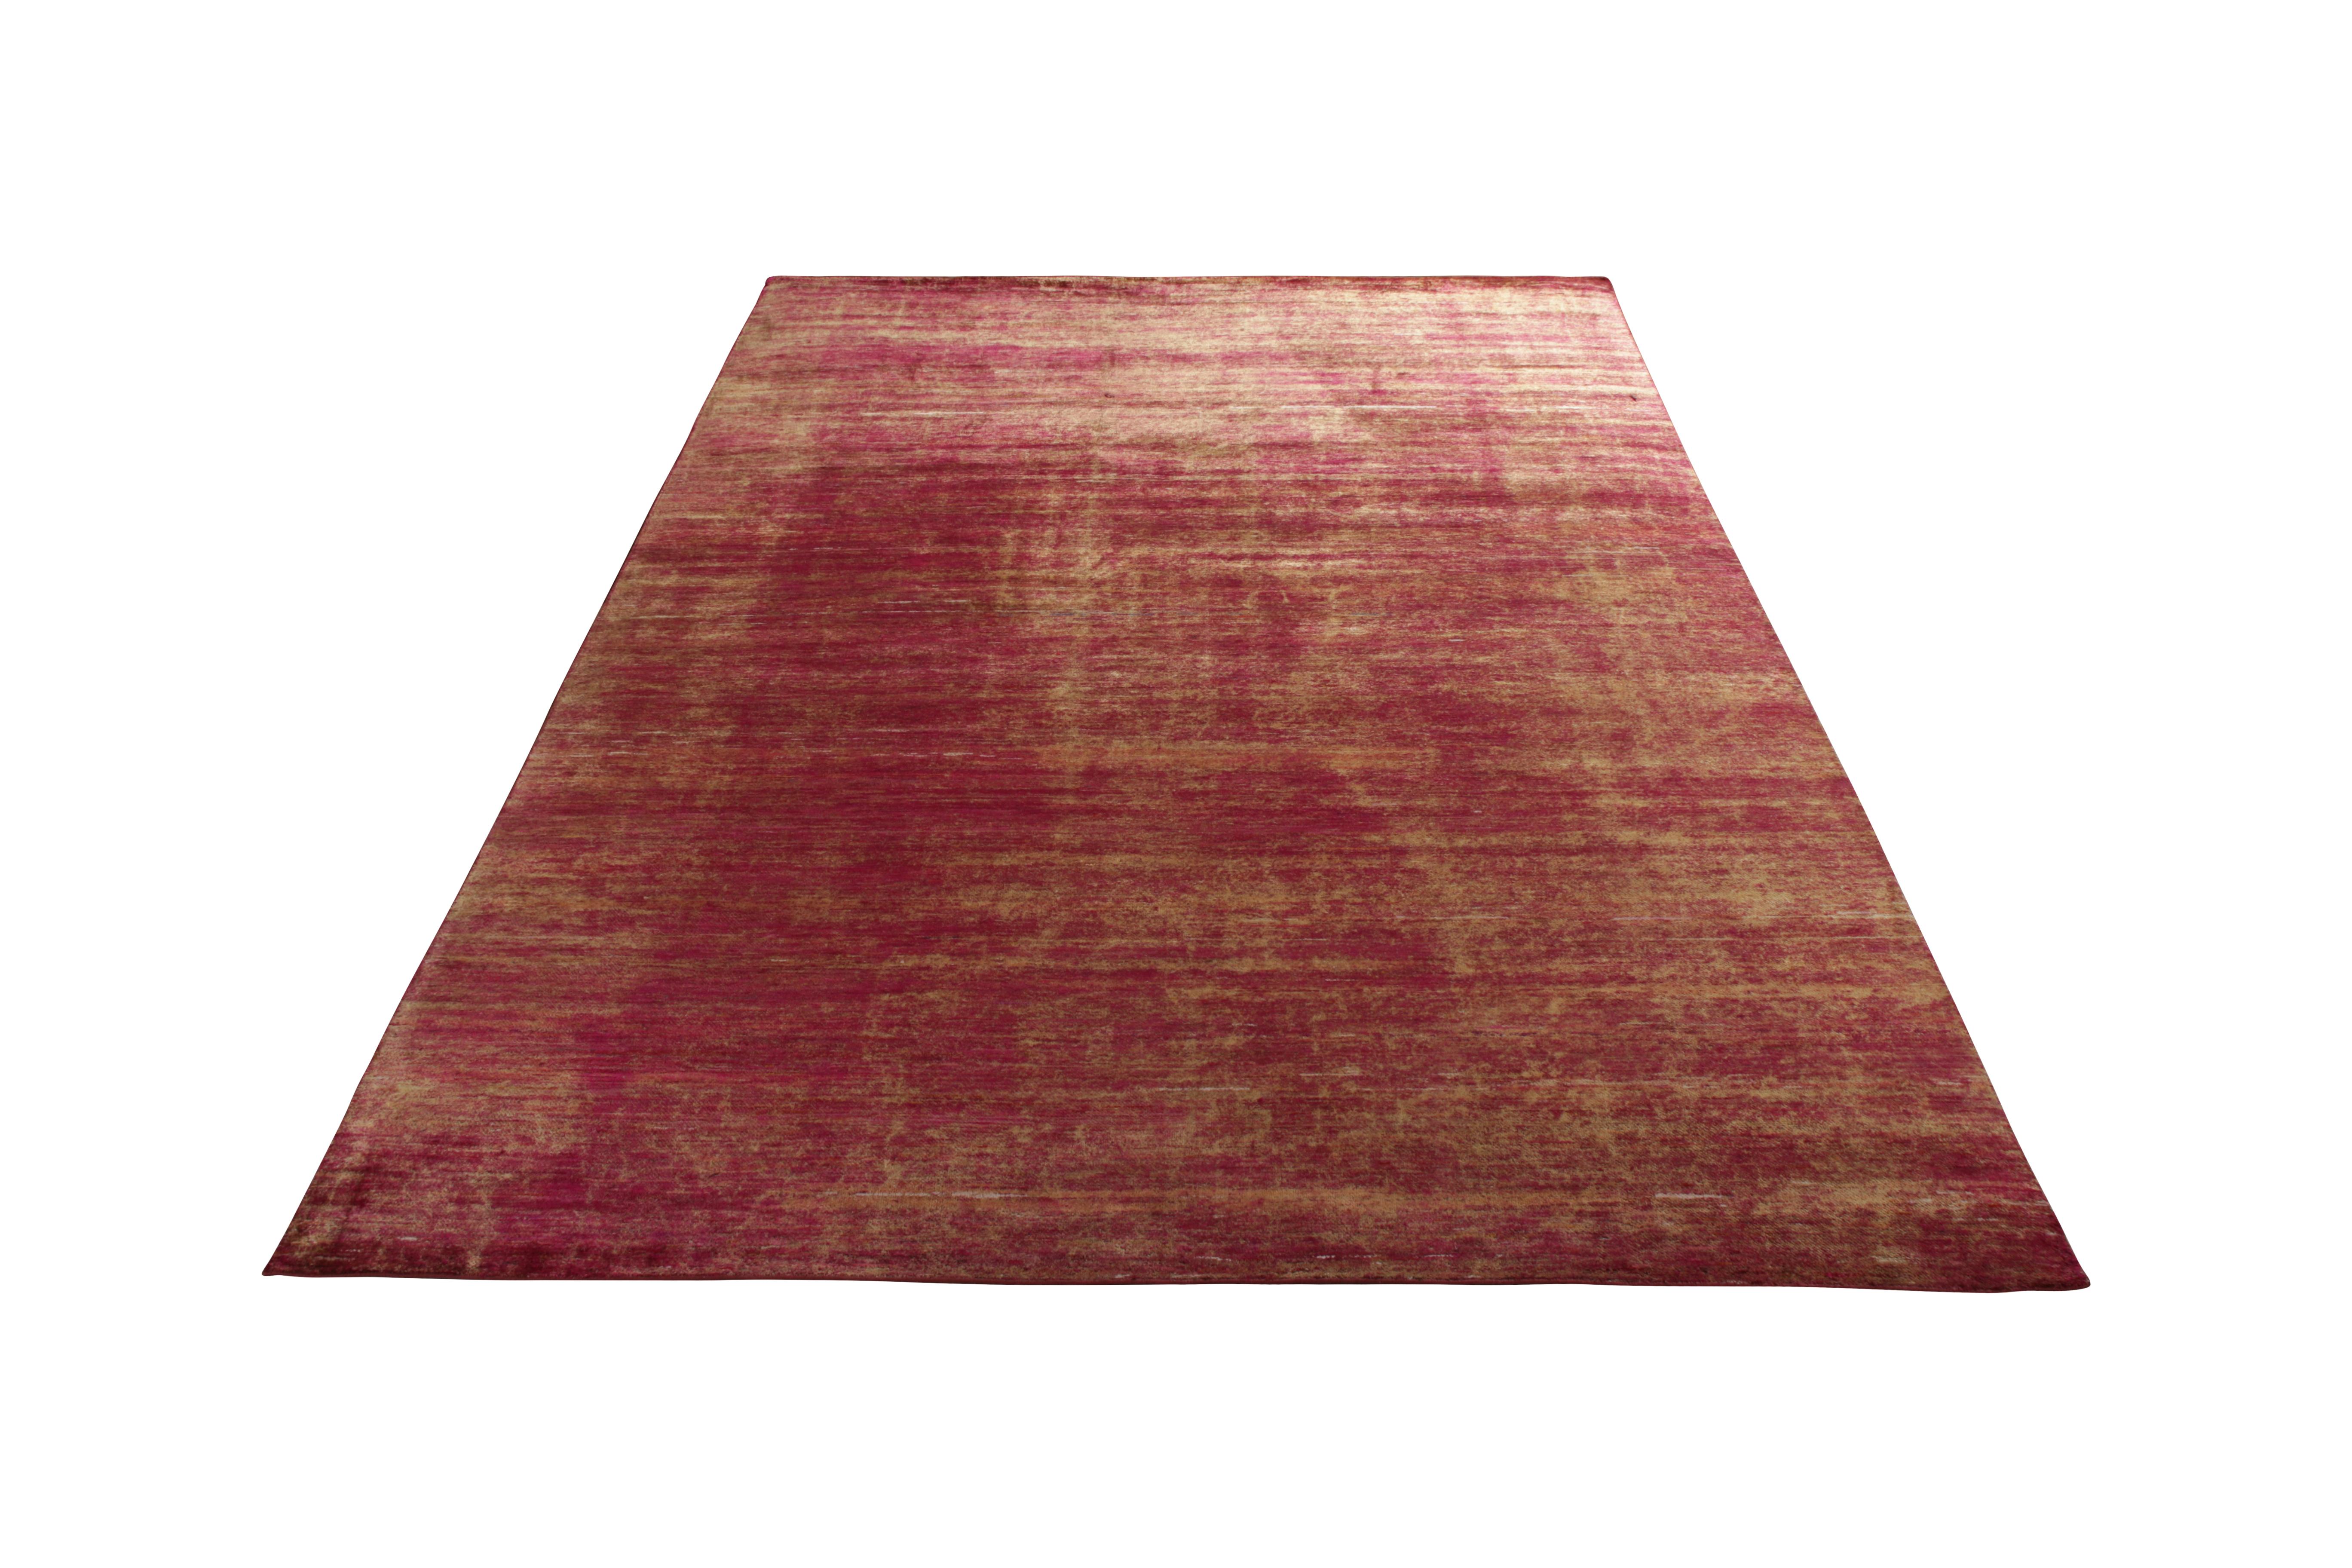 From Rug & Kilim’s Texture of Color collection, this contemporary rug innovates the concept of open field rugs and plain rug designs with subtle variations in color and craft. The luxurious hand knotted silk brings out the particularly bold play of